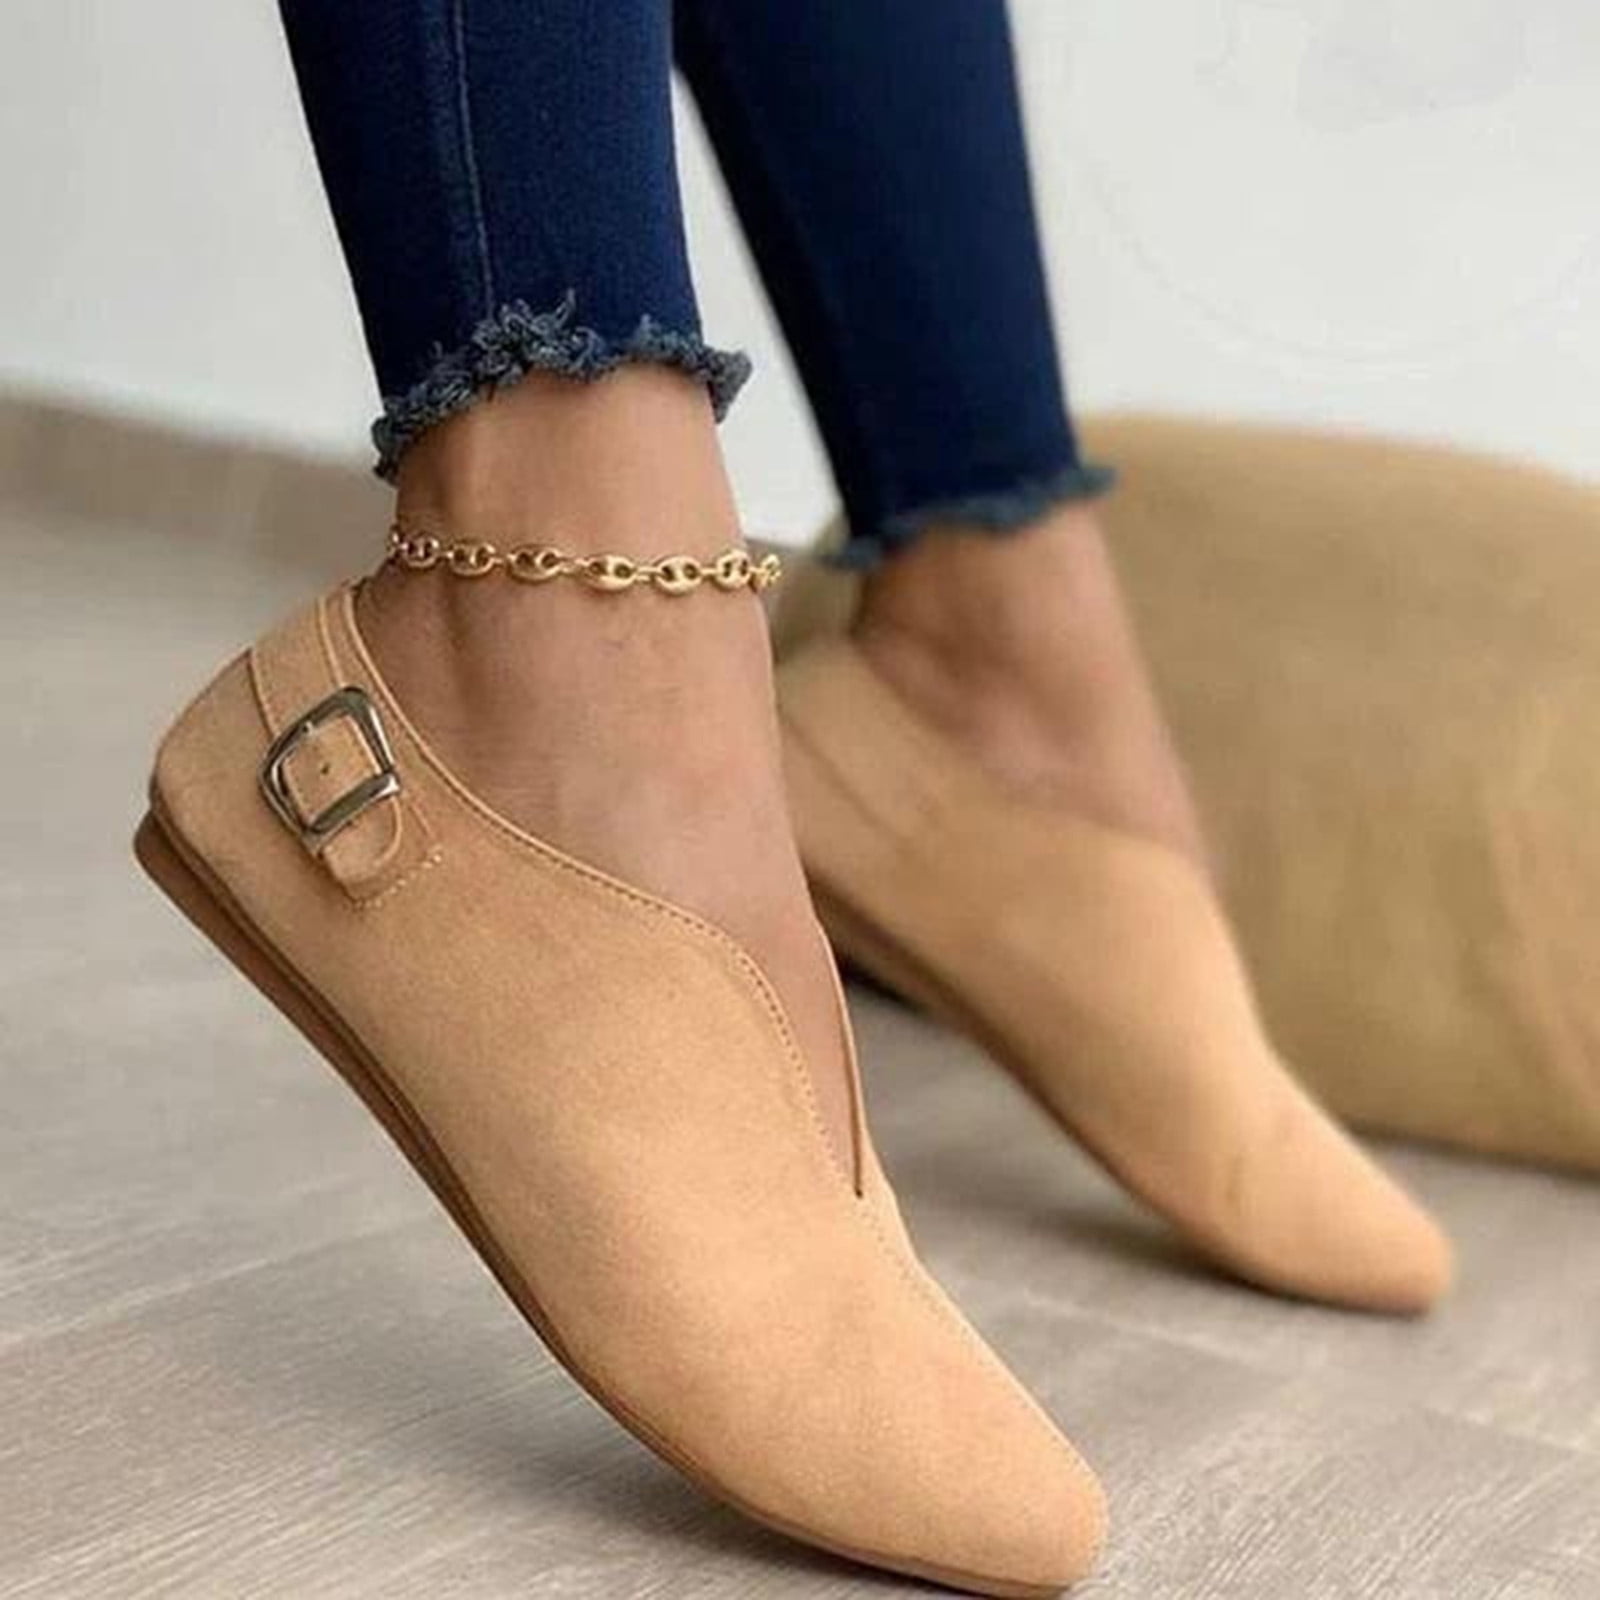 Women's Pointed Toe Suede Flock Casual Summer Flats Buckle Strap Loafers  Shoes